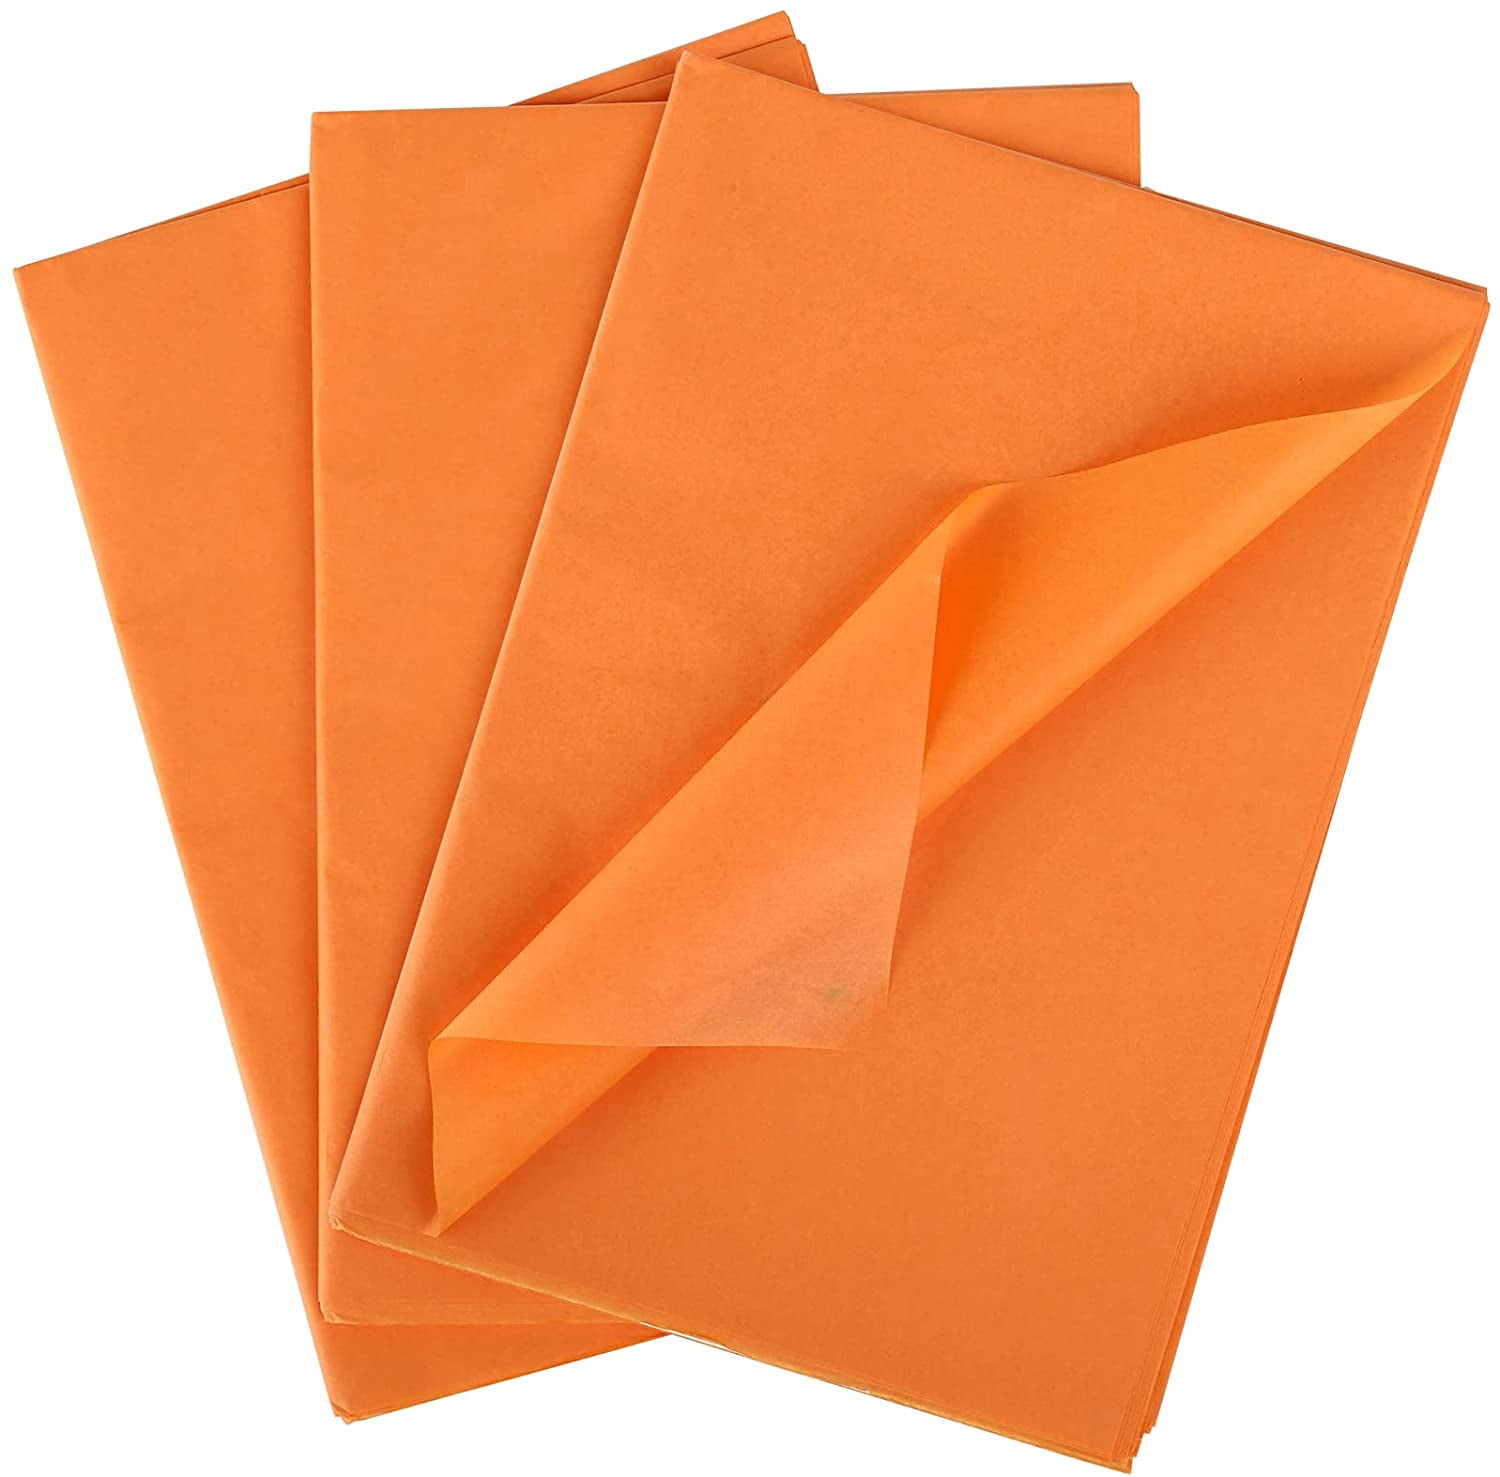 CHRORINE 60 Sheets Tissue Paper Autumn Wrapping Pape Bulk Assorted Color  Art Paper Crafts for Thanksgiving Harvest Birthday Party DIY and Craft Decor